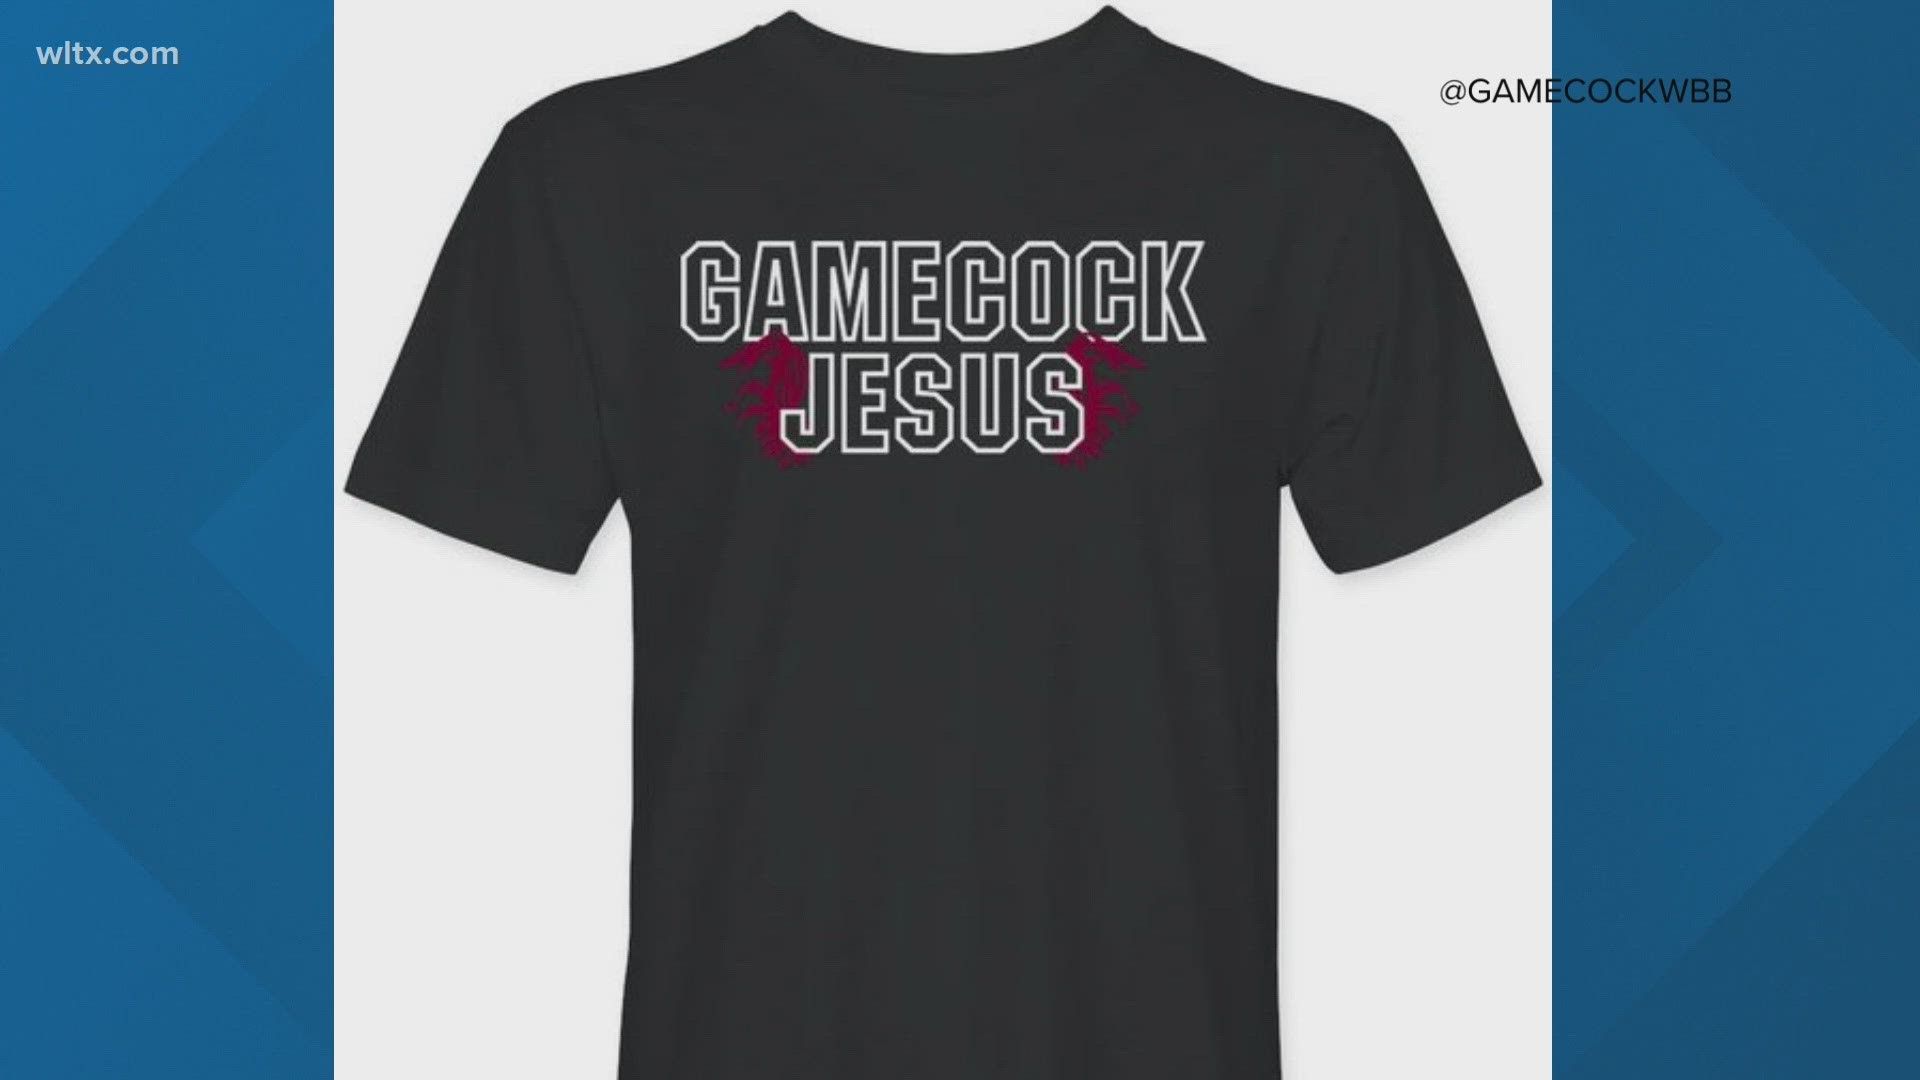 The t-shirt honors Carlton Thompson aka "Gamecock Jesus" who passed away in December.   The money raised will go to Special Olympics.